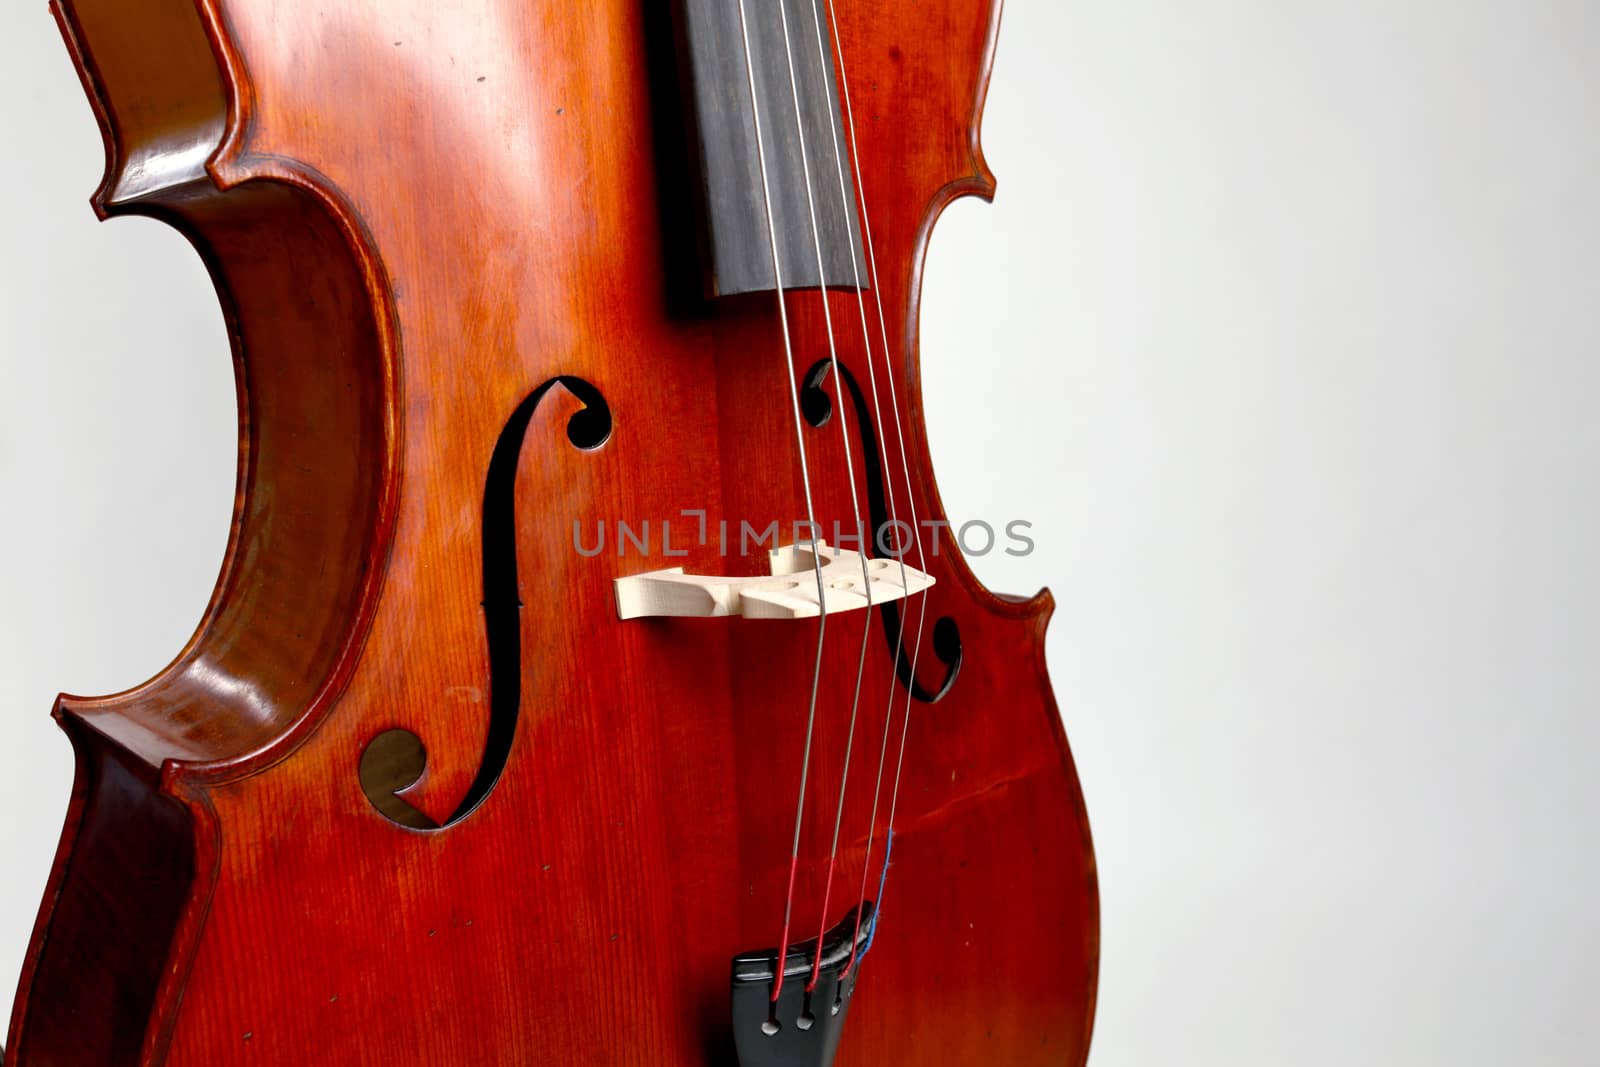 Old double bass c bout and belly on white background